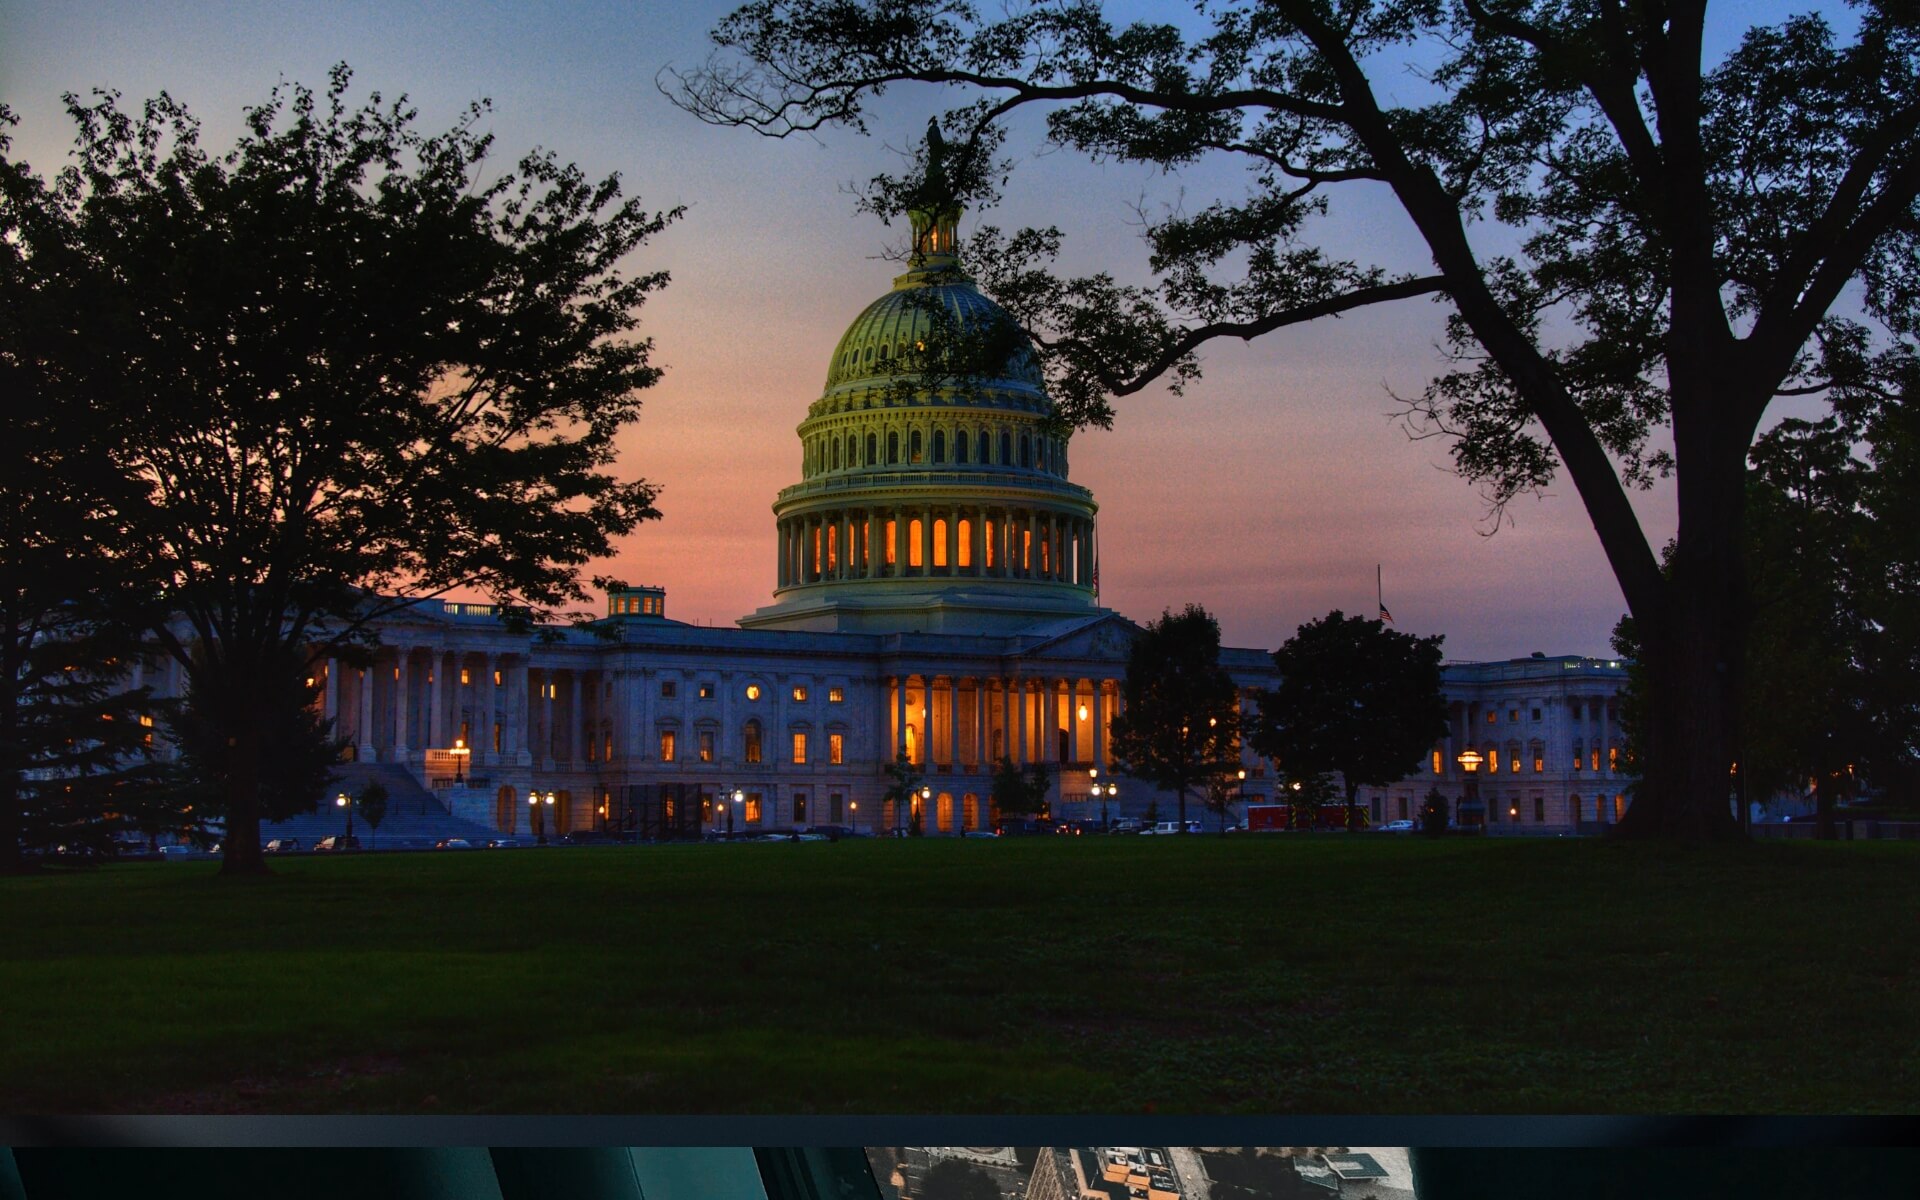 The United States Capitol at dusk, illuminated from within,